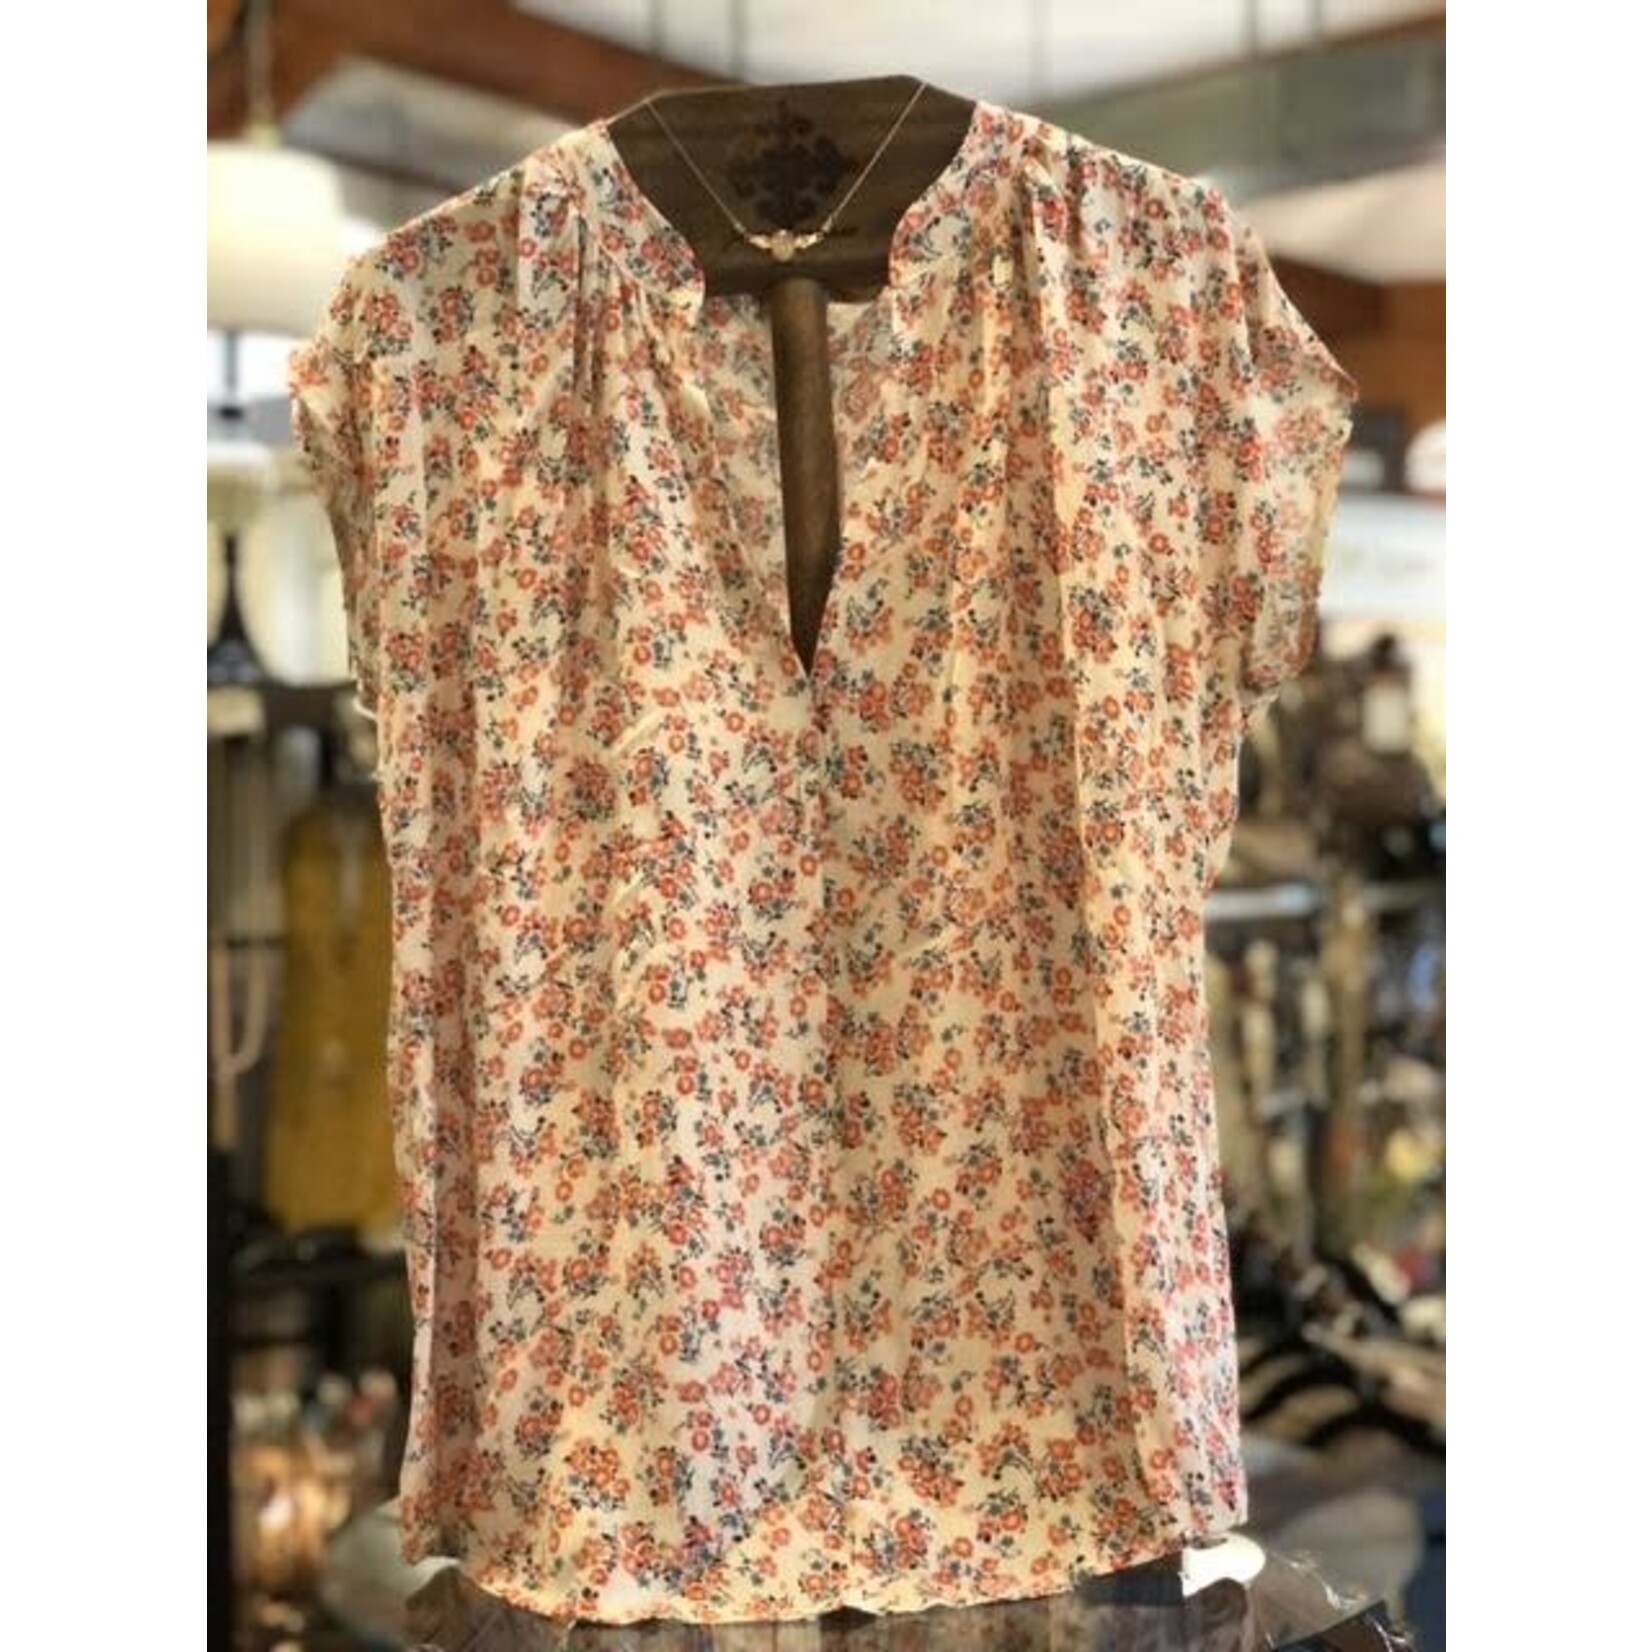 7th Ray 7th Ray Floral Knit V Neck Top